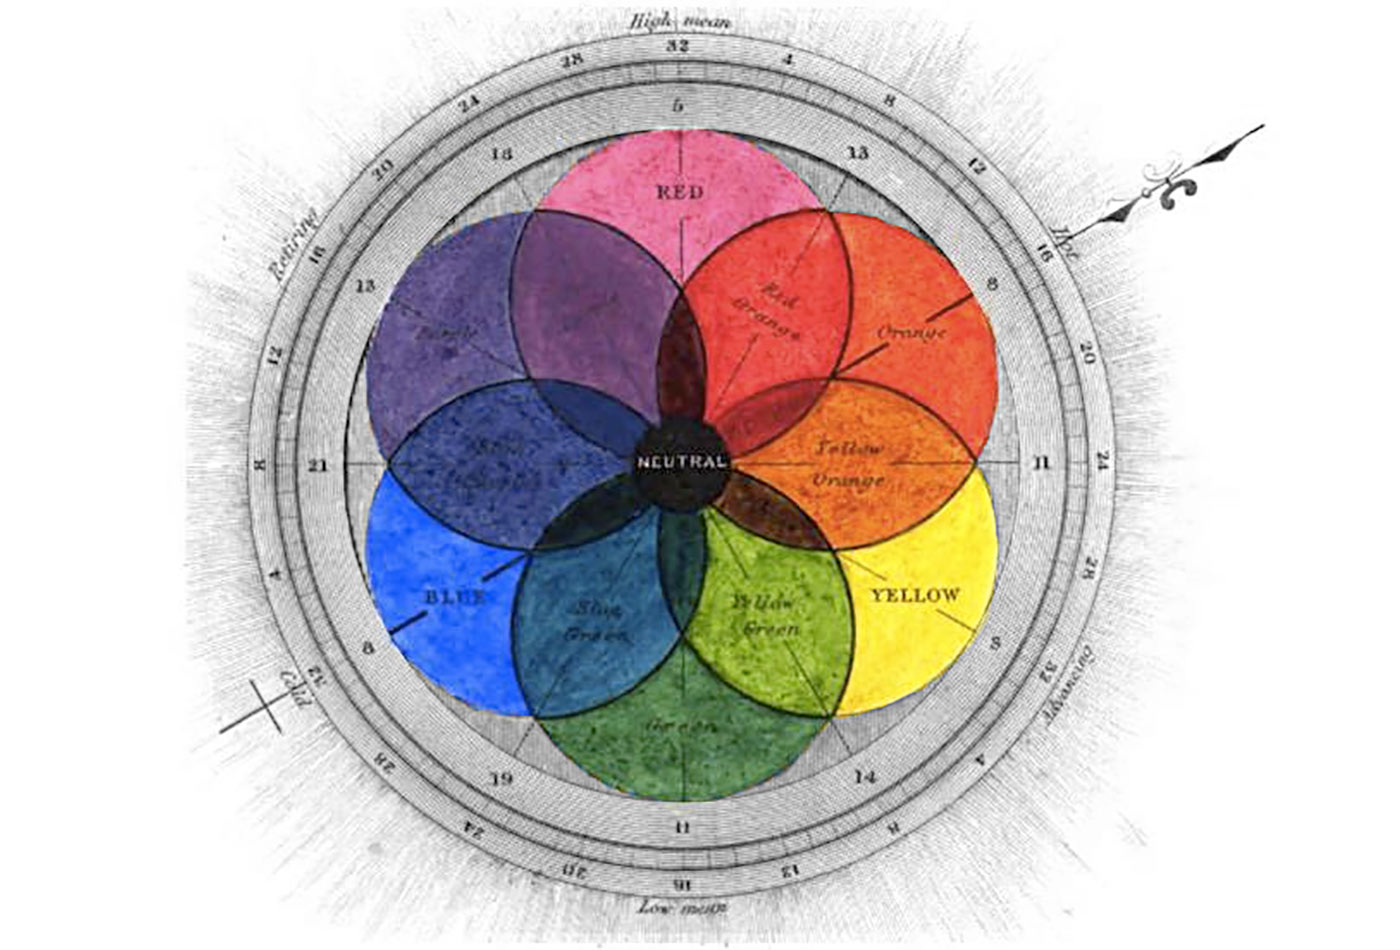 RYB color chart from George Field's 1841 "Chromatography; or, A treatise on colours and pigments: and of their powers in painting"